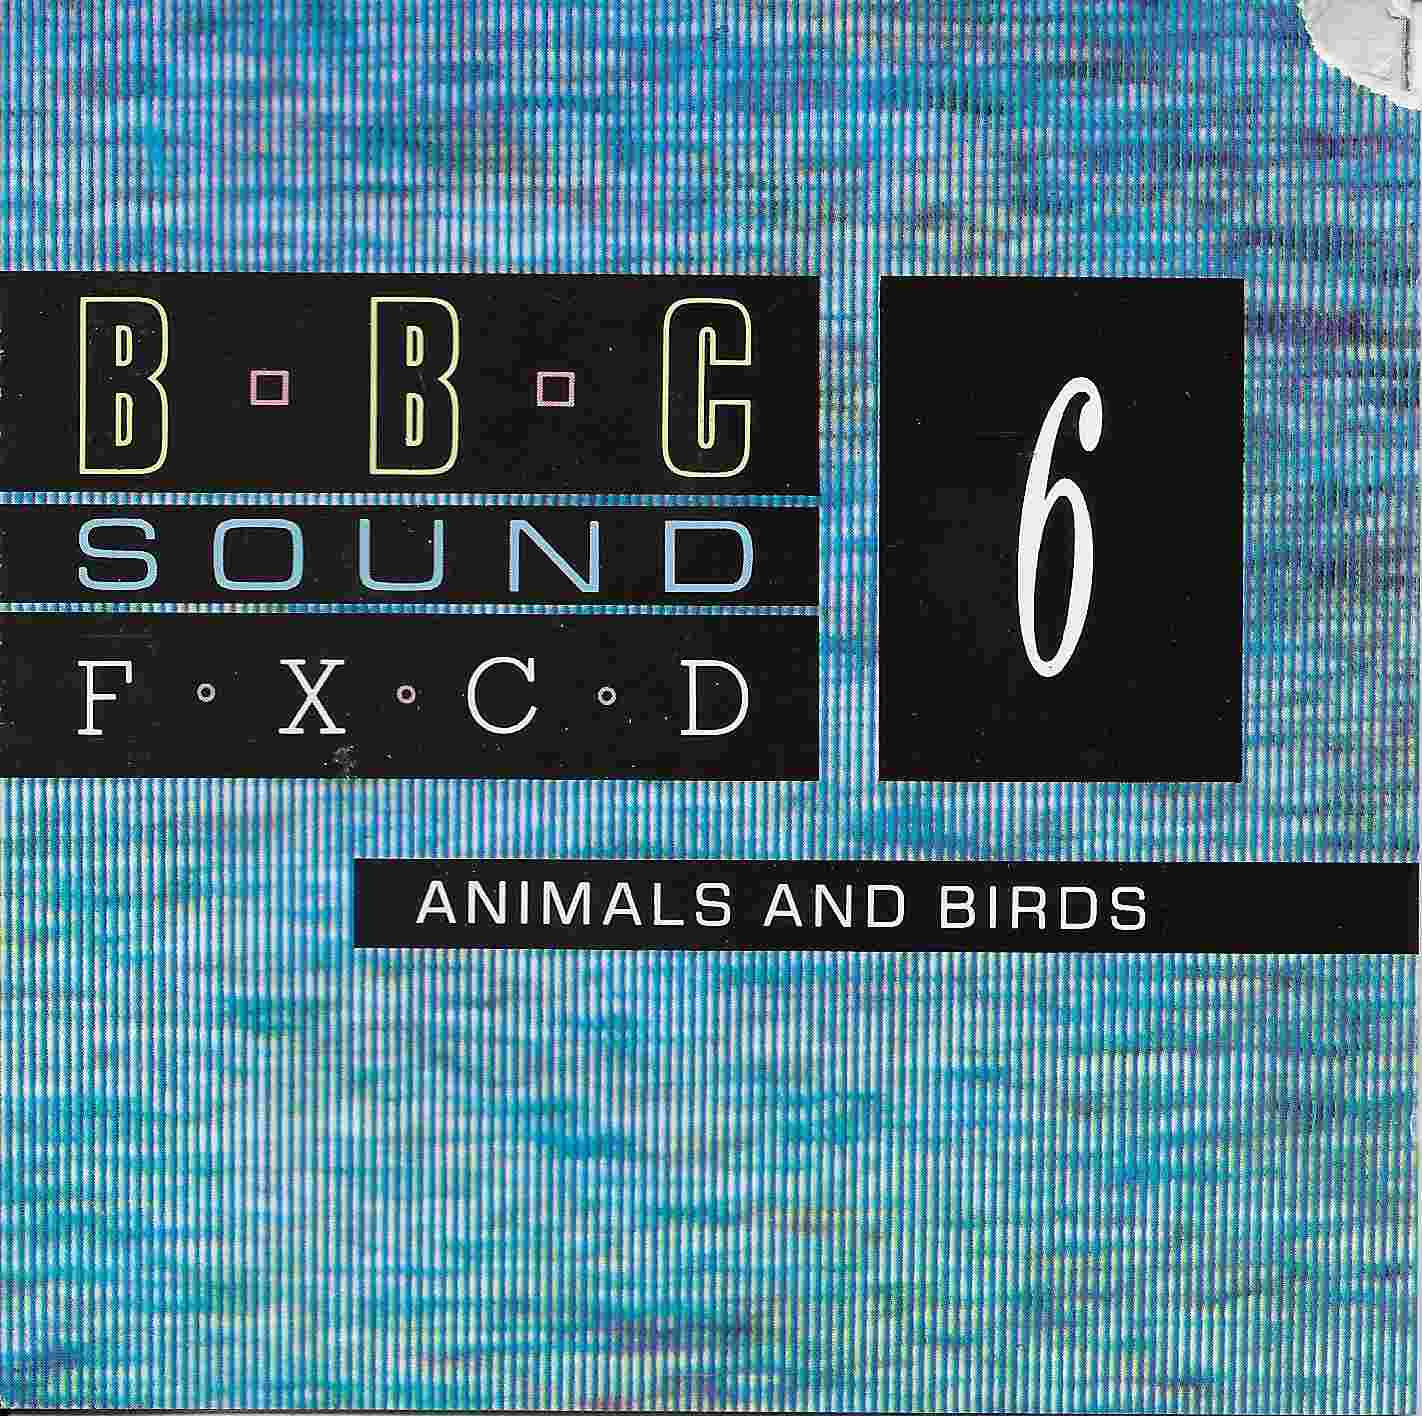 Picture of BBCCD SFX006 Animals and birds by artist Various from the BBC records and Tapes library